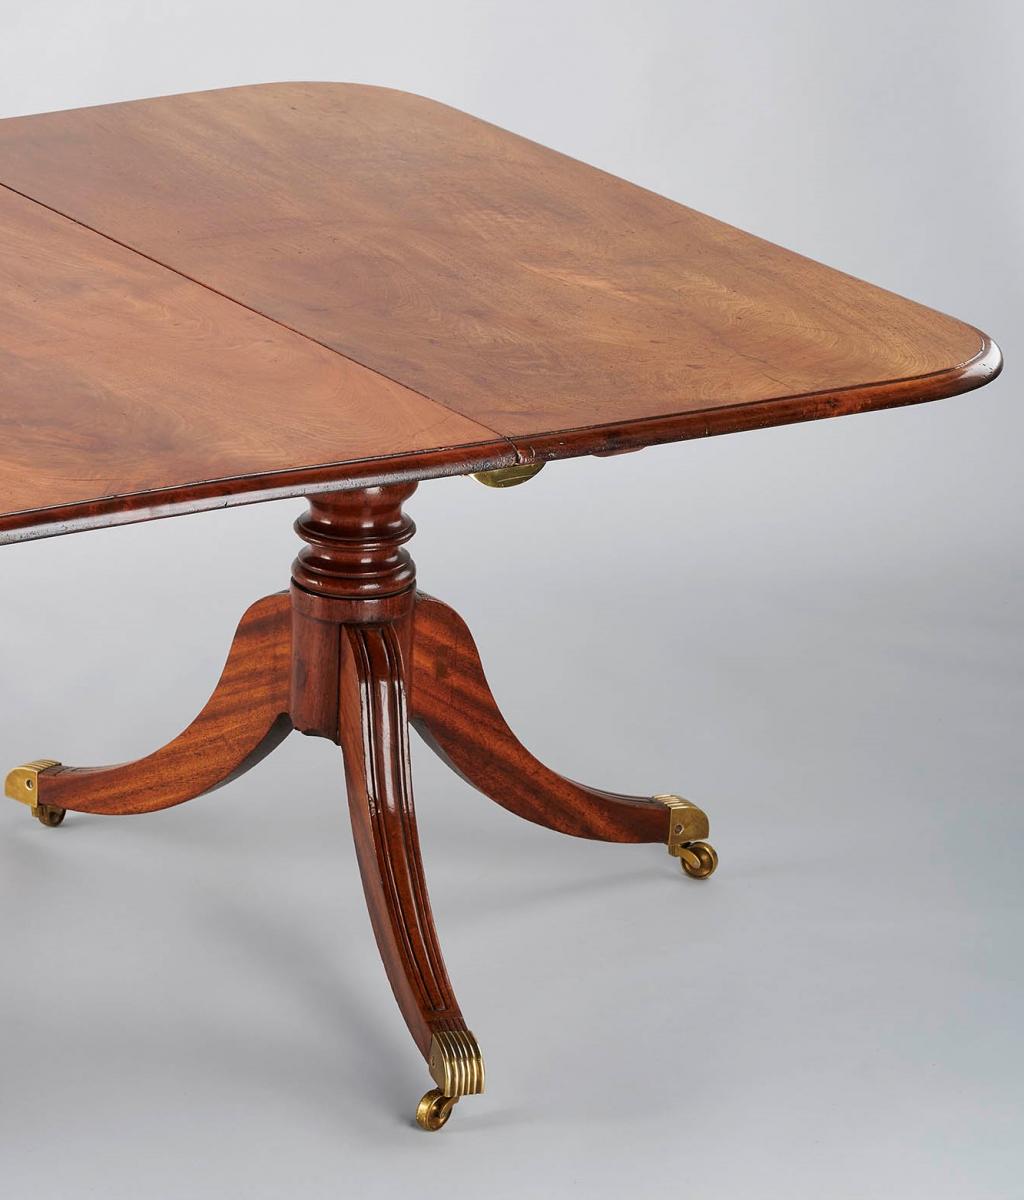 George IV period mahogany twin-pedestal dining table